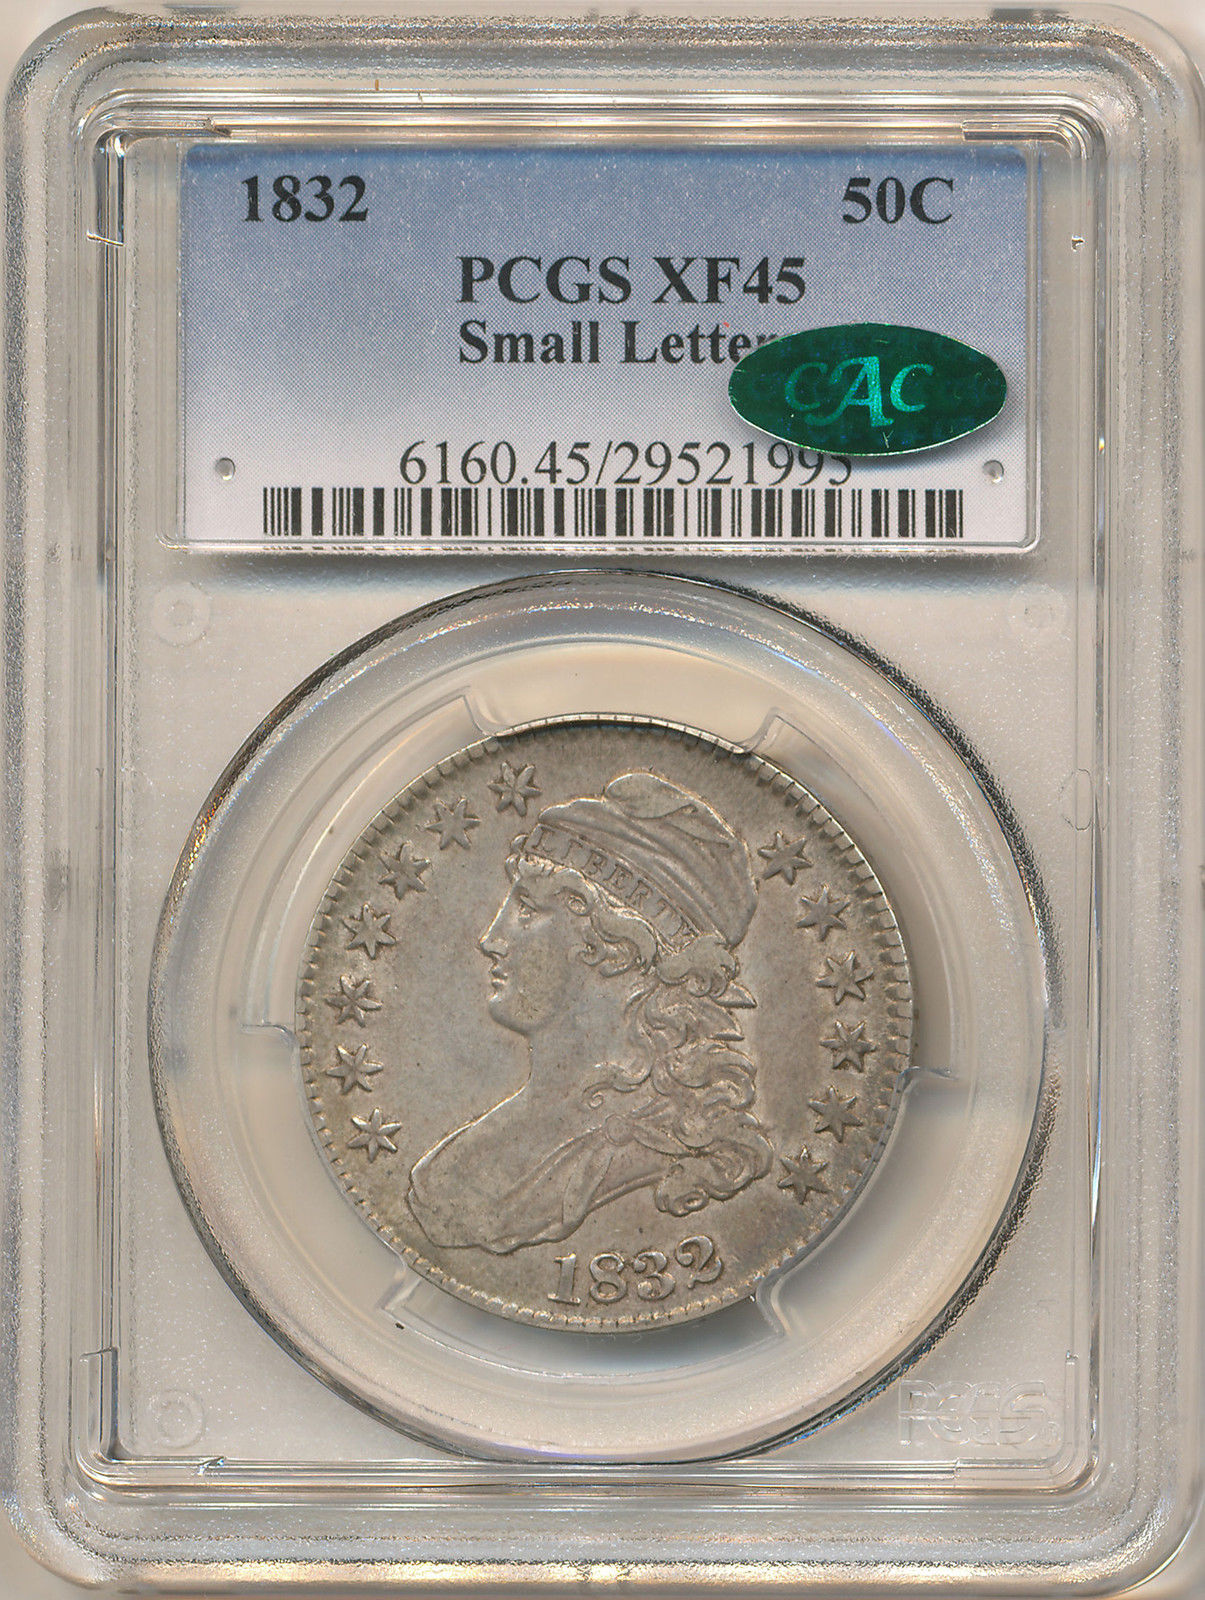 1832 50C 'SM LTRS' CAPPED BUST HALF DOLLAR XF45 PCGS CAC. O-110, R2 PCGS 29521995 CAC obv seller.jpg